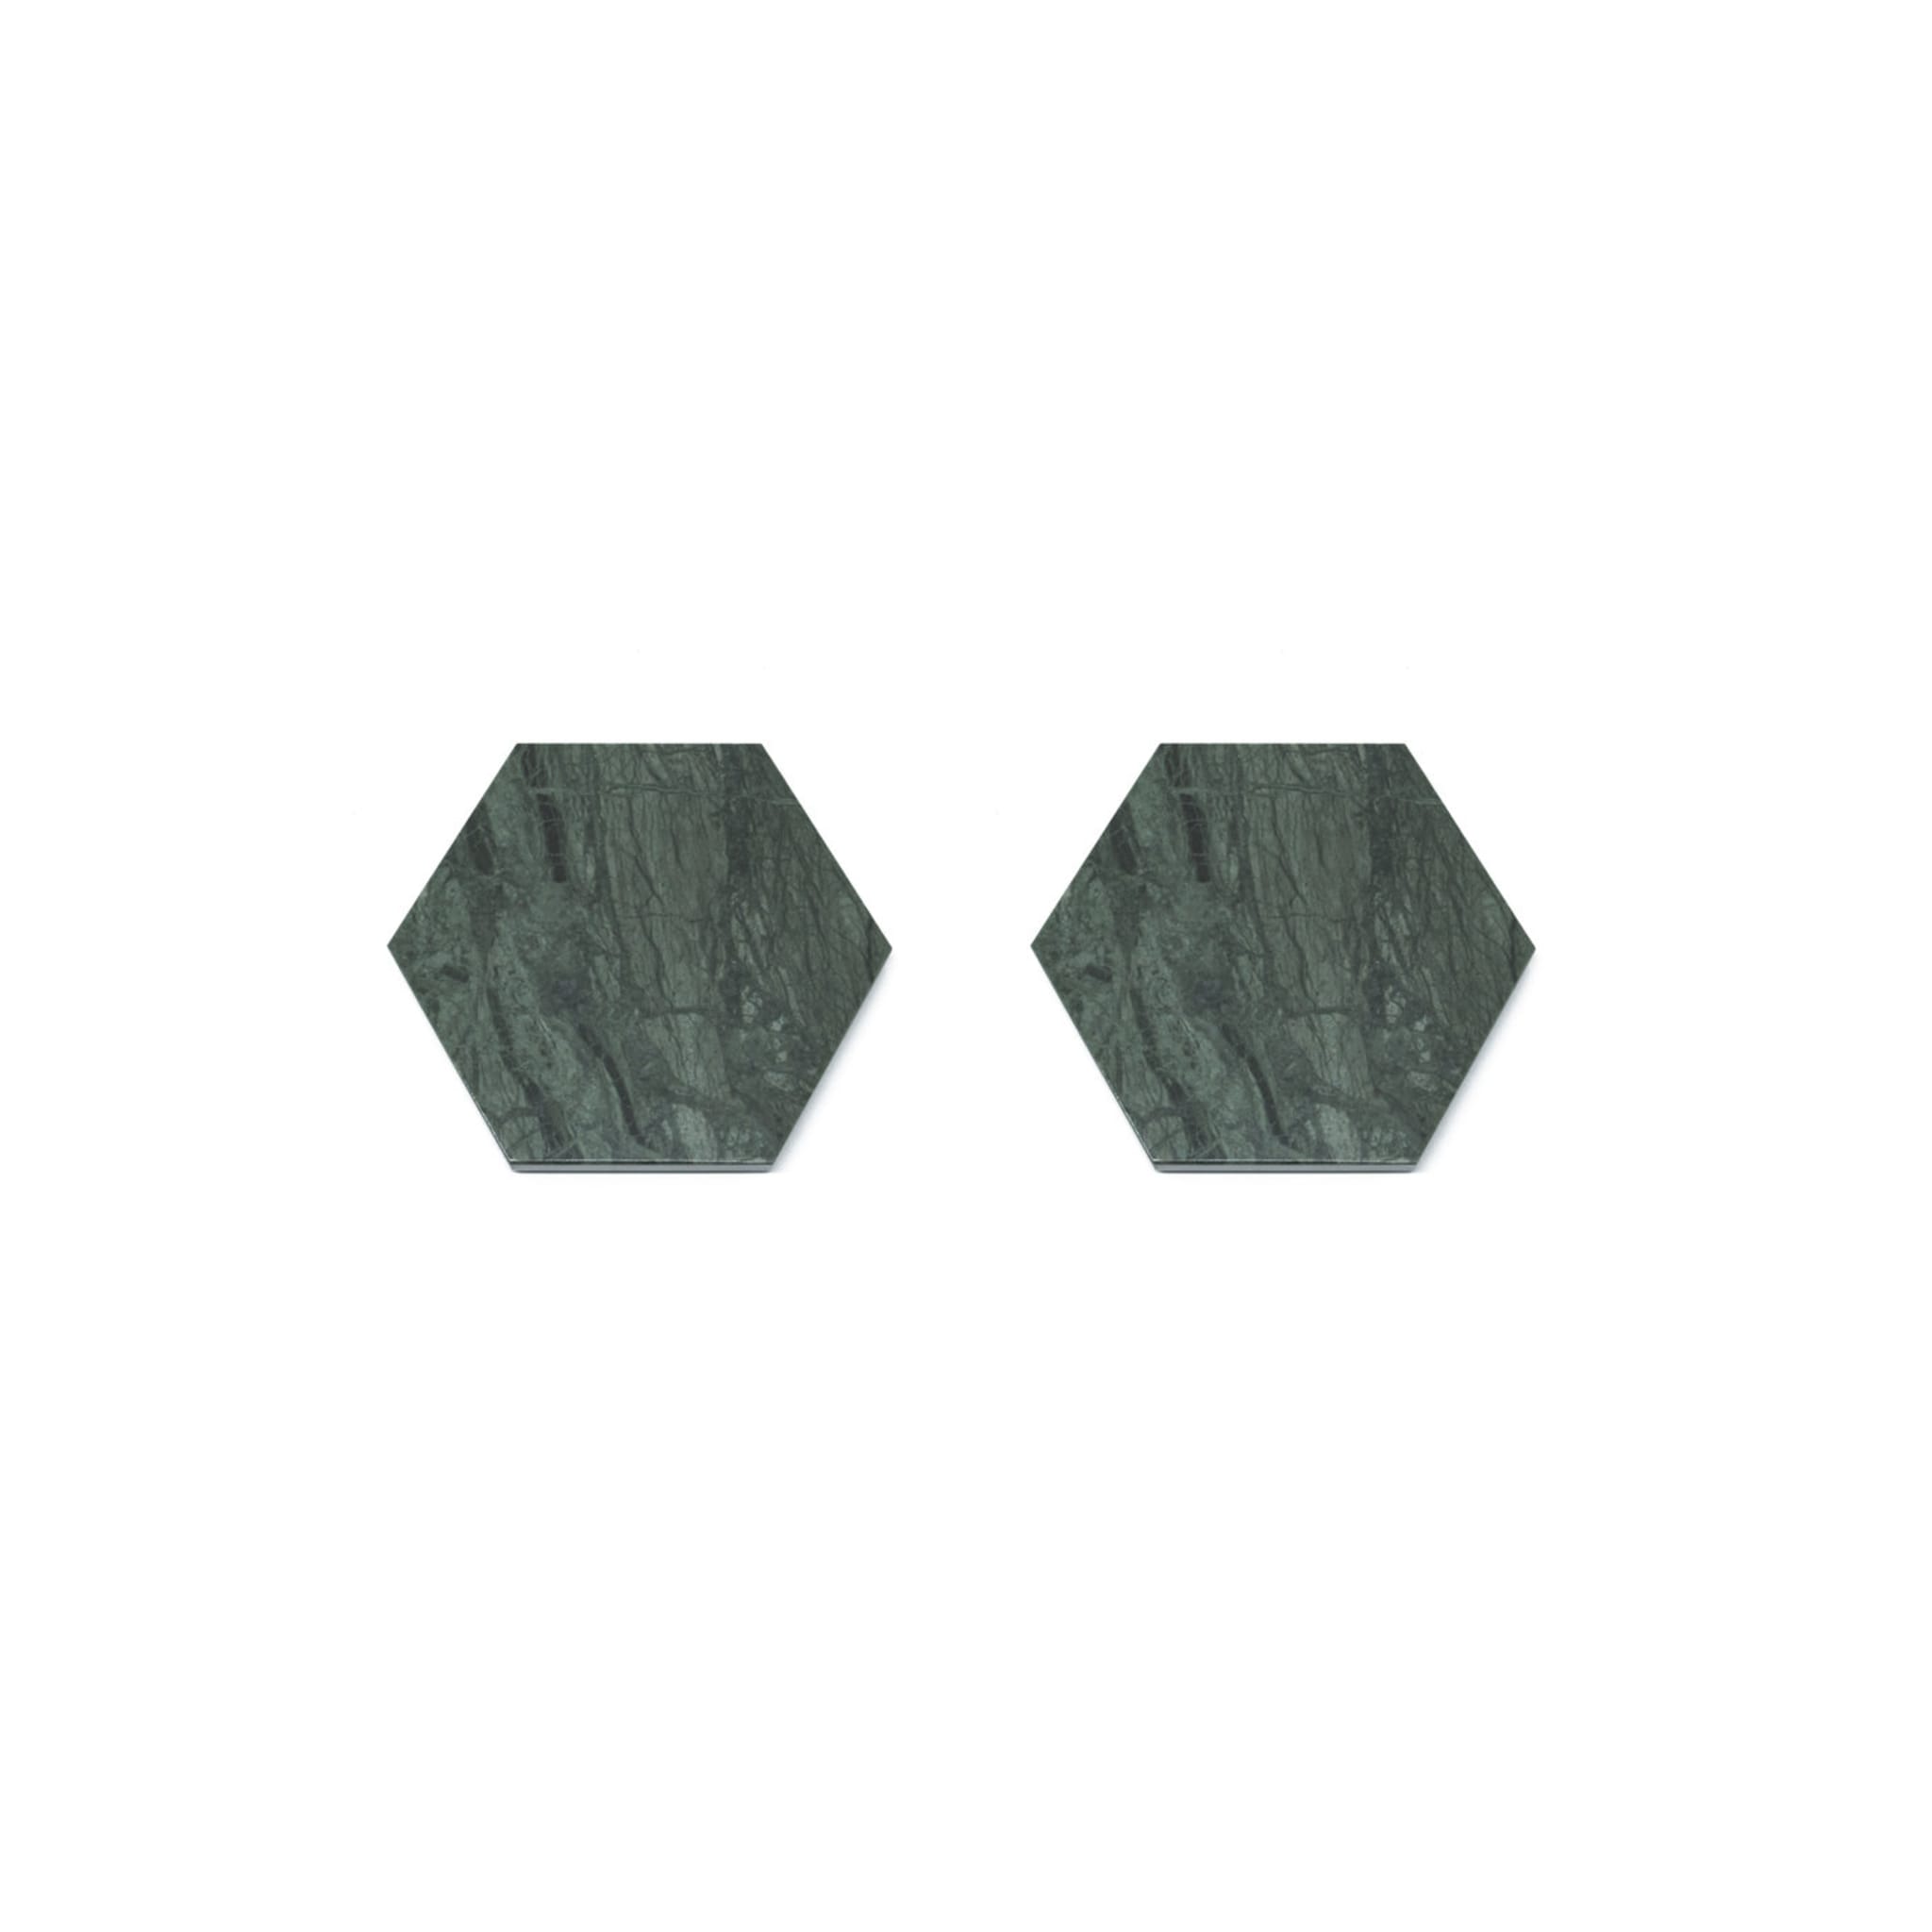 Set of 4 Hexagonal Coasters in Green Marble - Alternative view 1